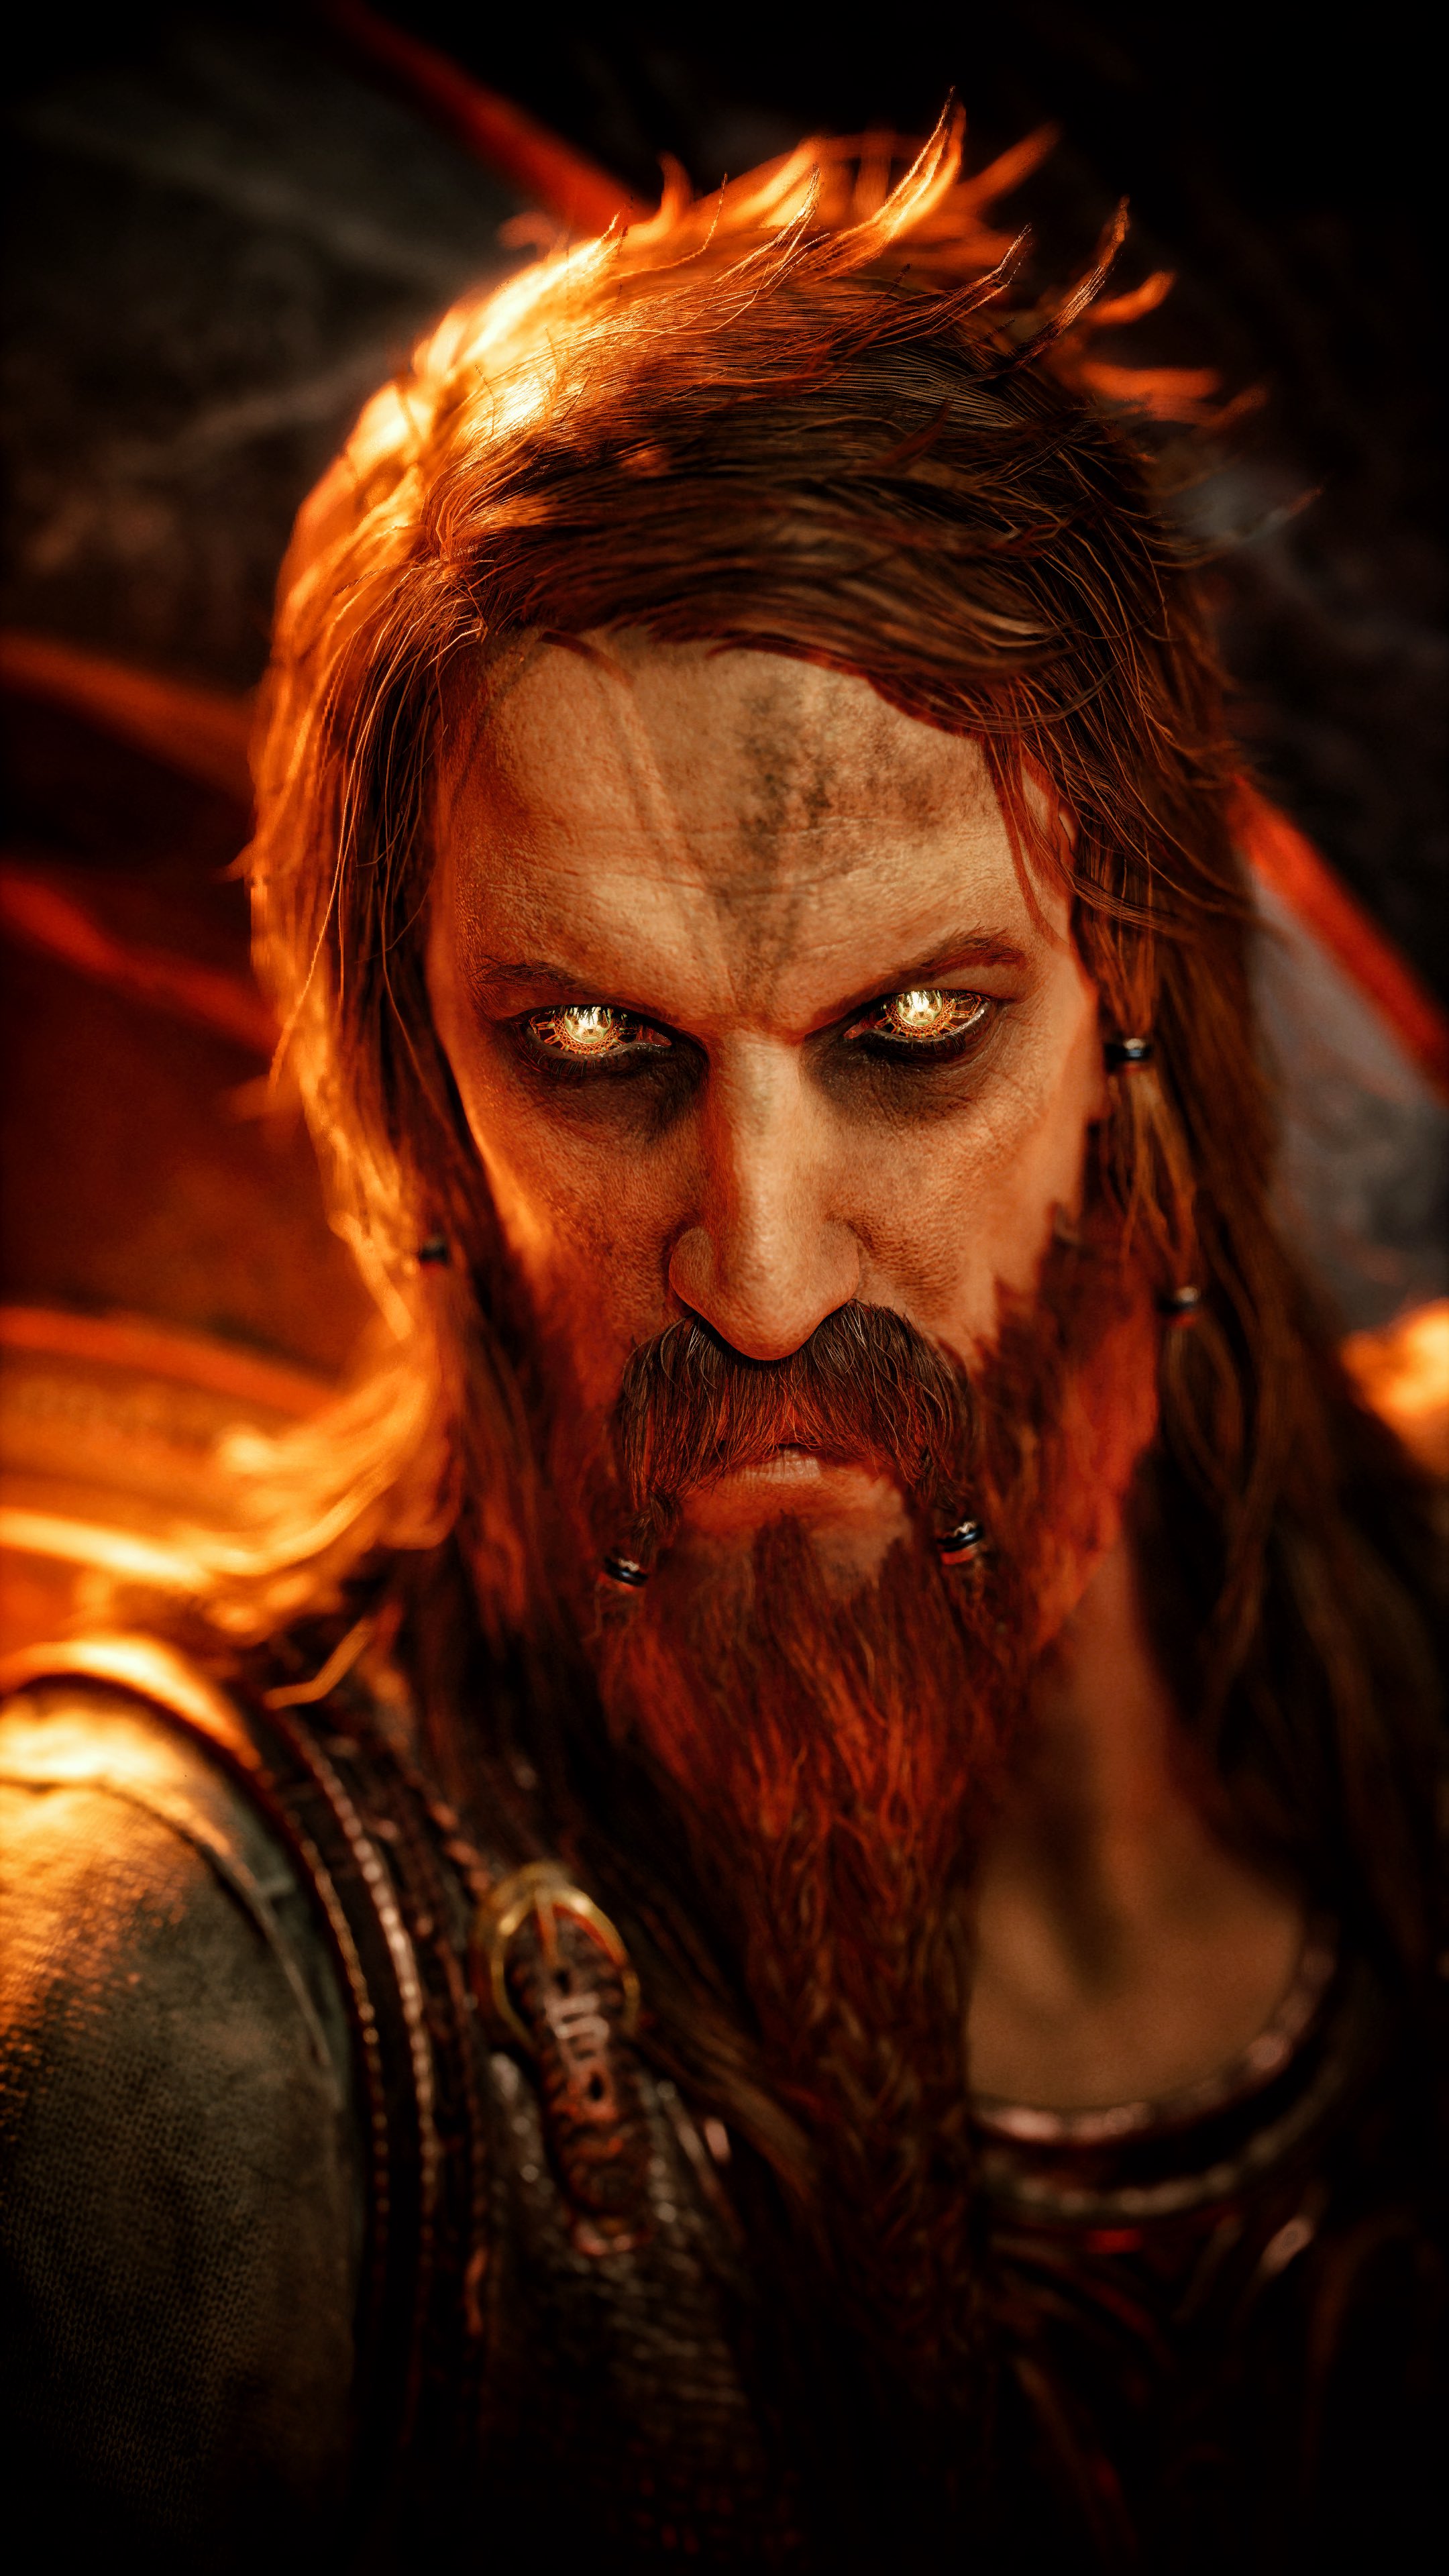 God of War Ragnarök: Tyr May Bring About the End of the Norse Pantheon